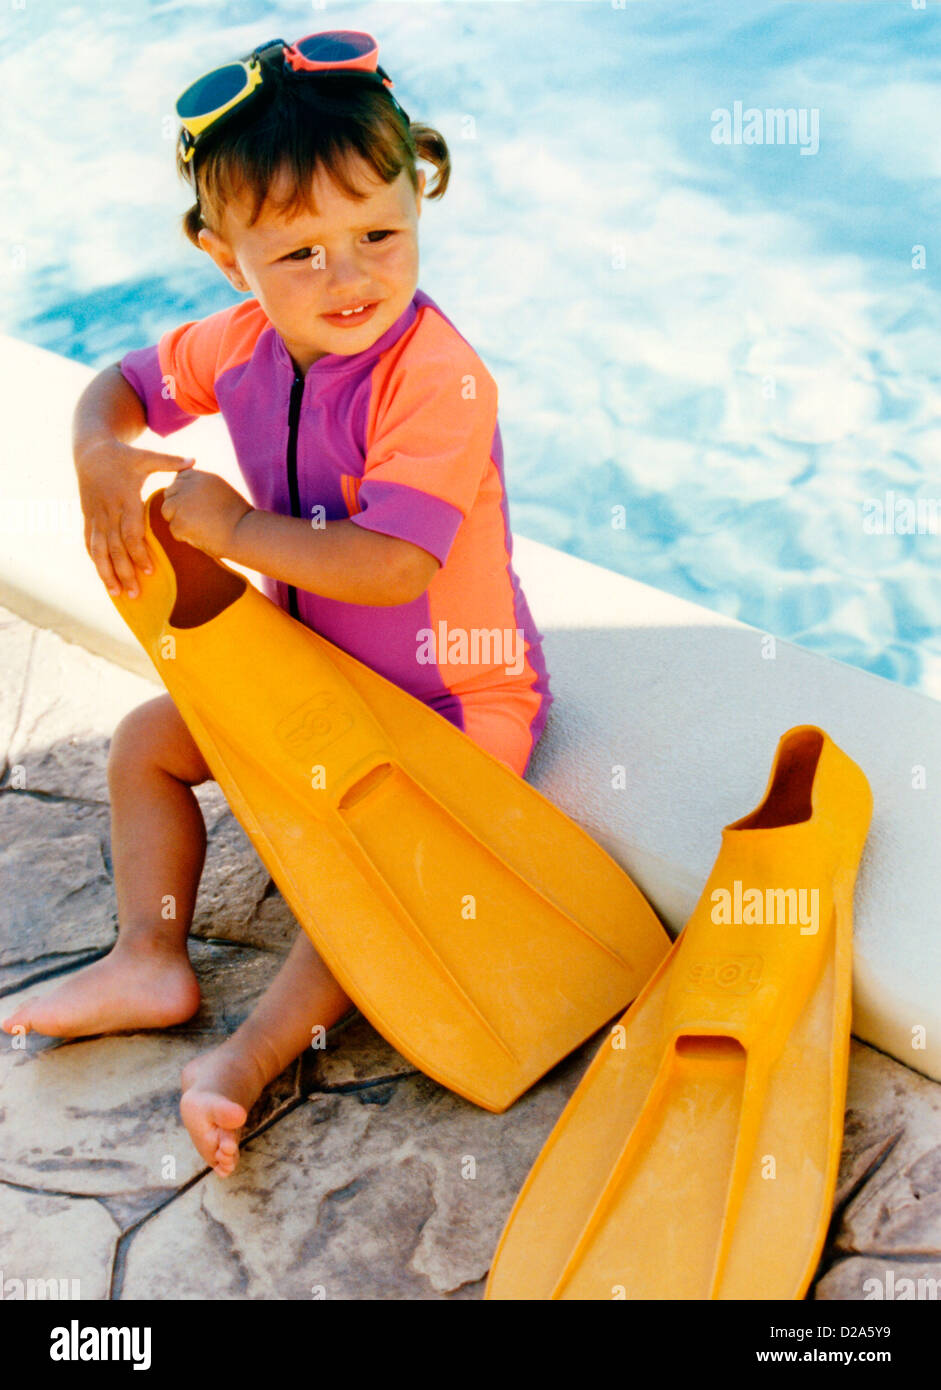 Portrait Of Young Girl In Wetsuit Wearing Swim Goggles, Playing With Adult Sized Flippers Next To Swimming Pool. Stock Photo